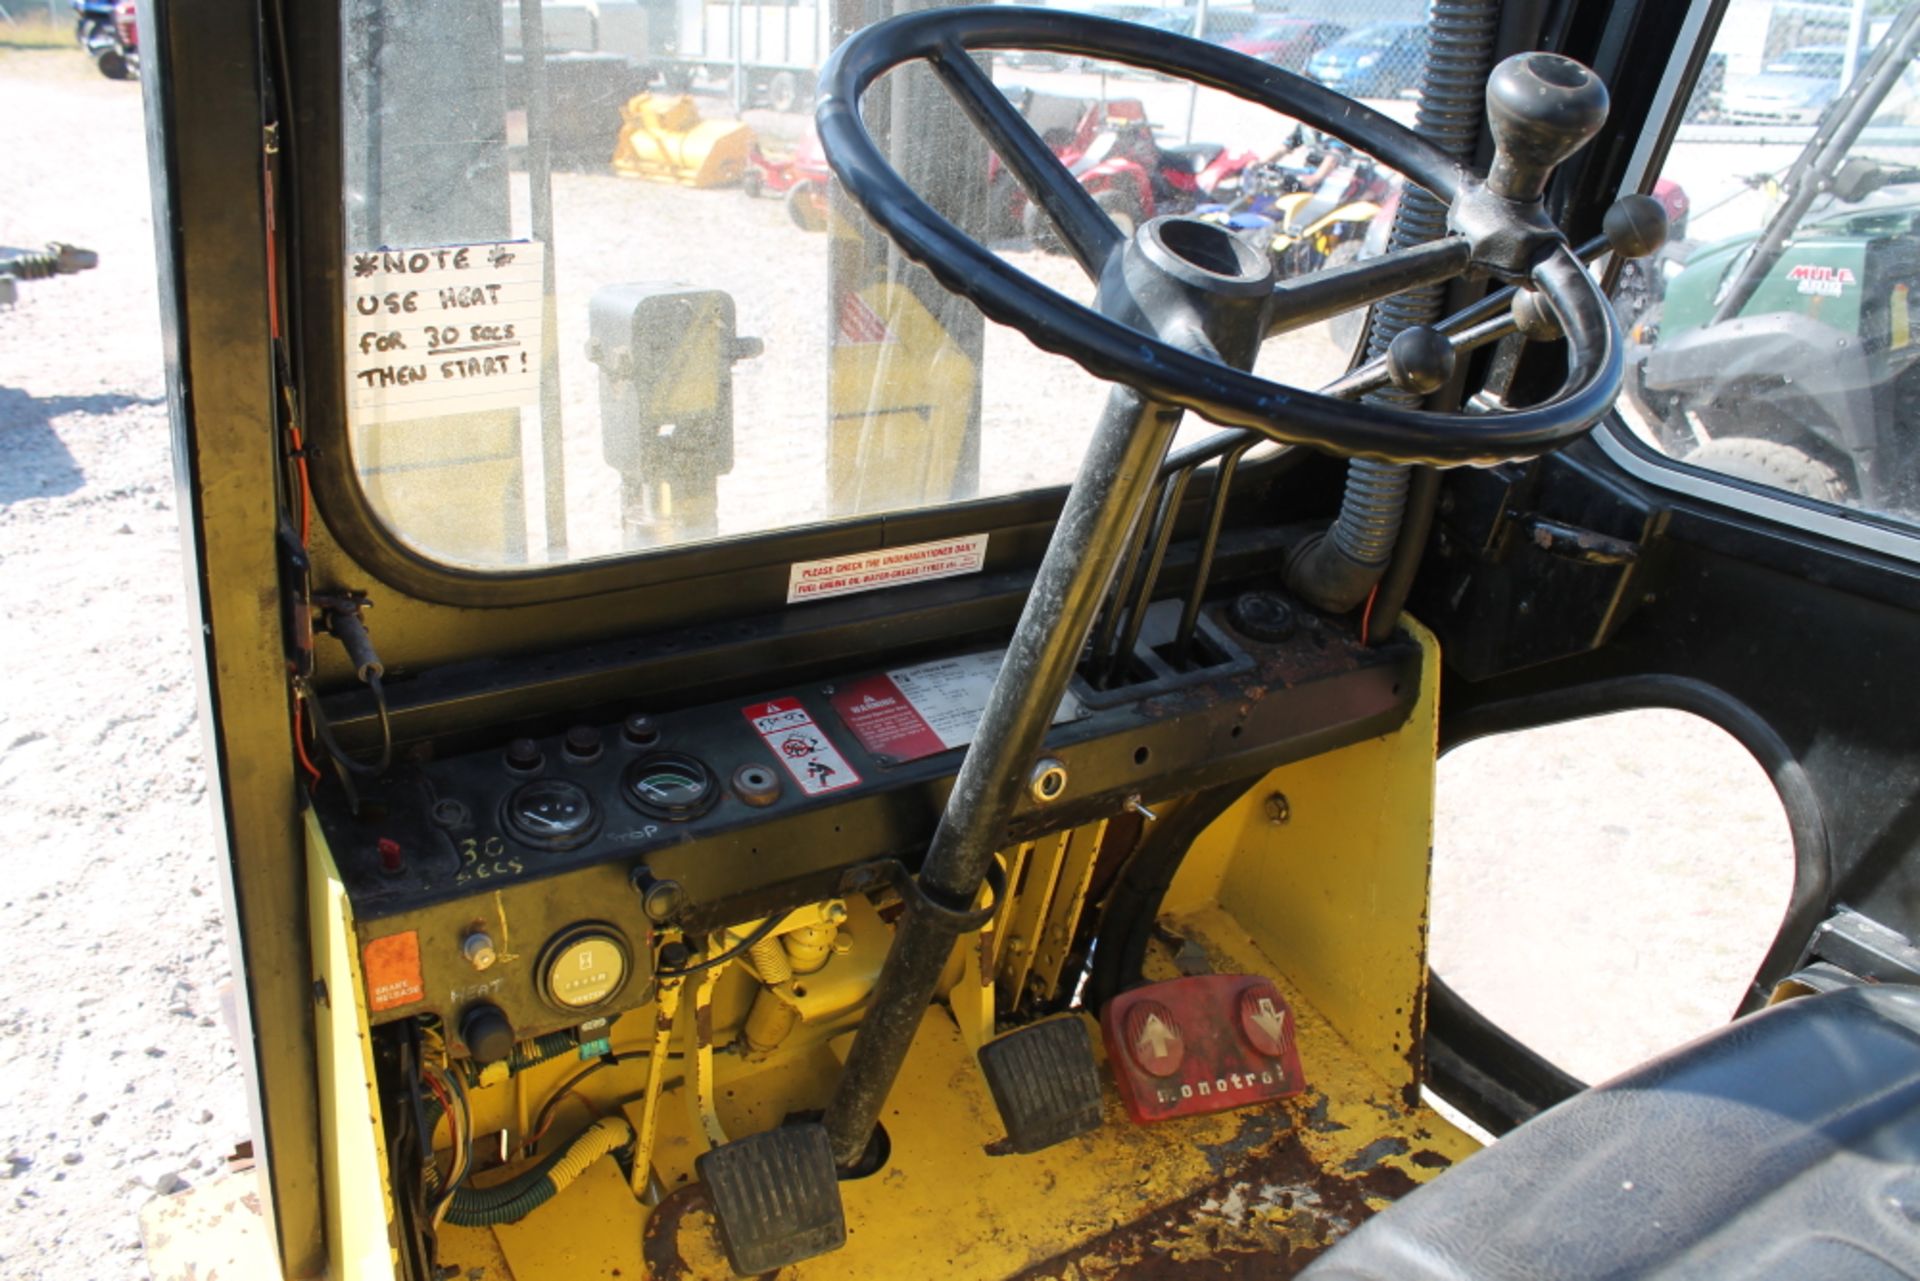 Sale Item:   HYSTER FORKLIFT KEY IN P/CABIN   Vat Status:    Plus Vat @ 20 %   Buyers Fees on this l - Image 3 of 3